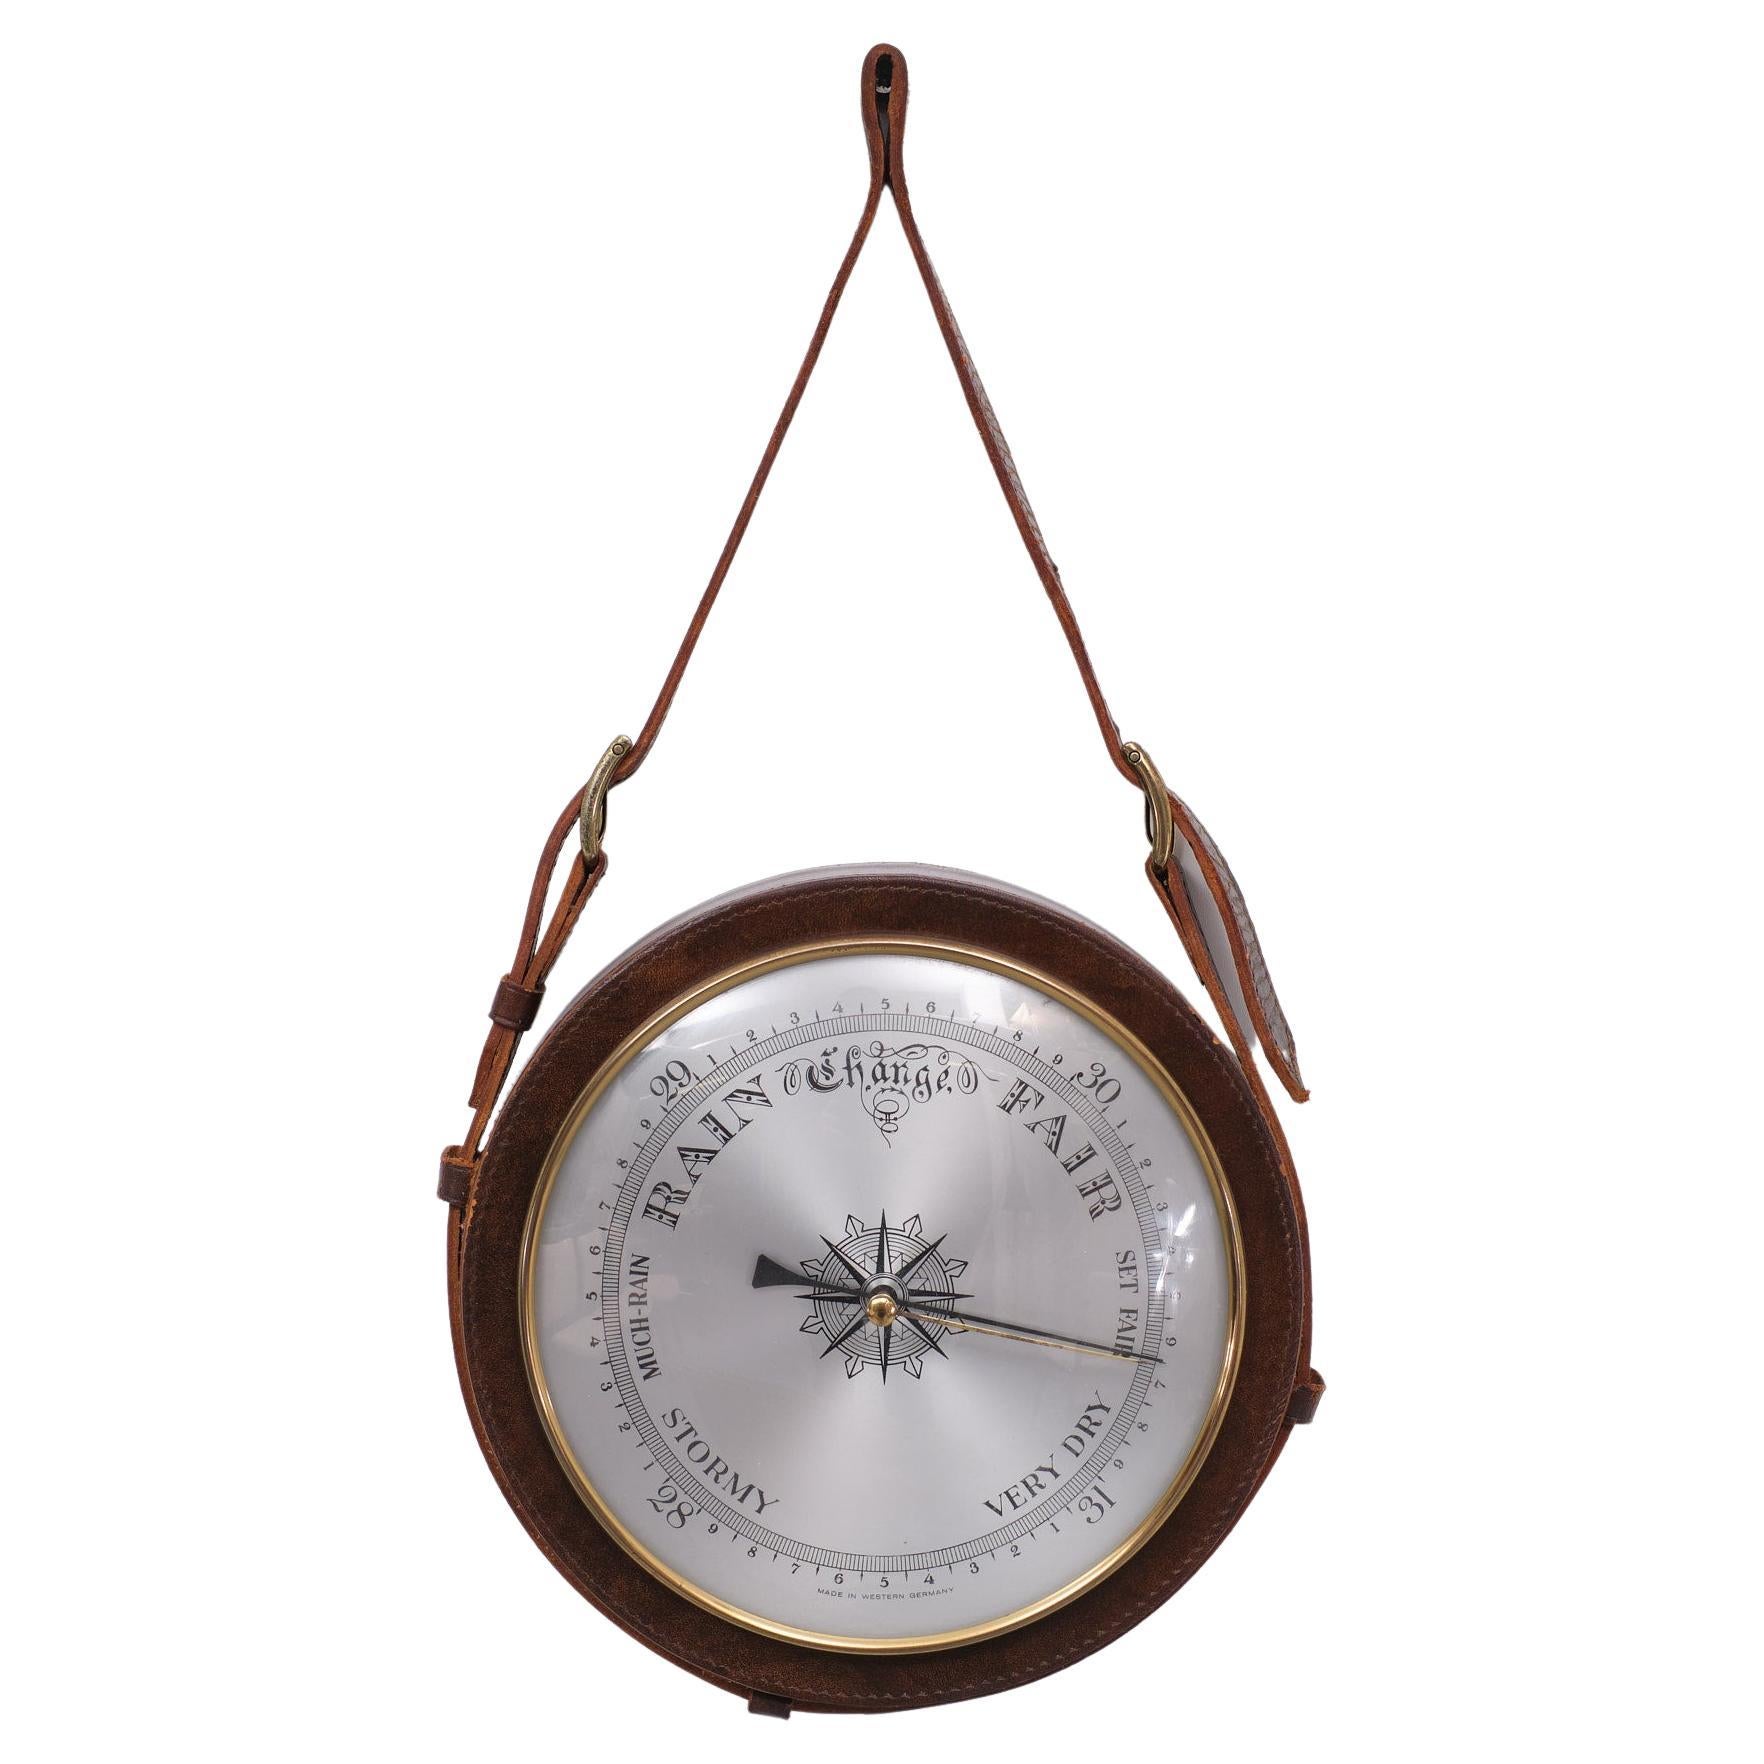 Stich Leather Hanging Barometer Westen, Germany, 1960s